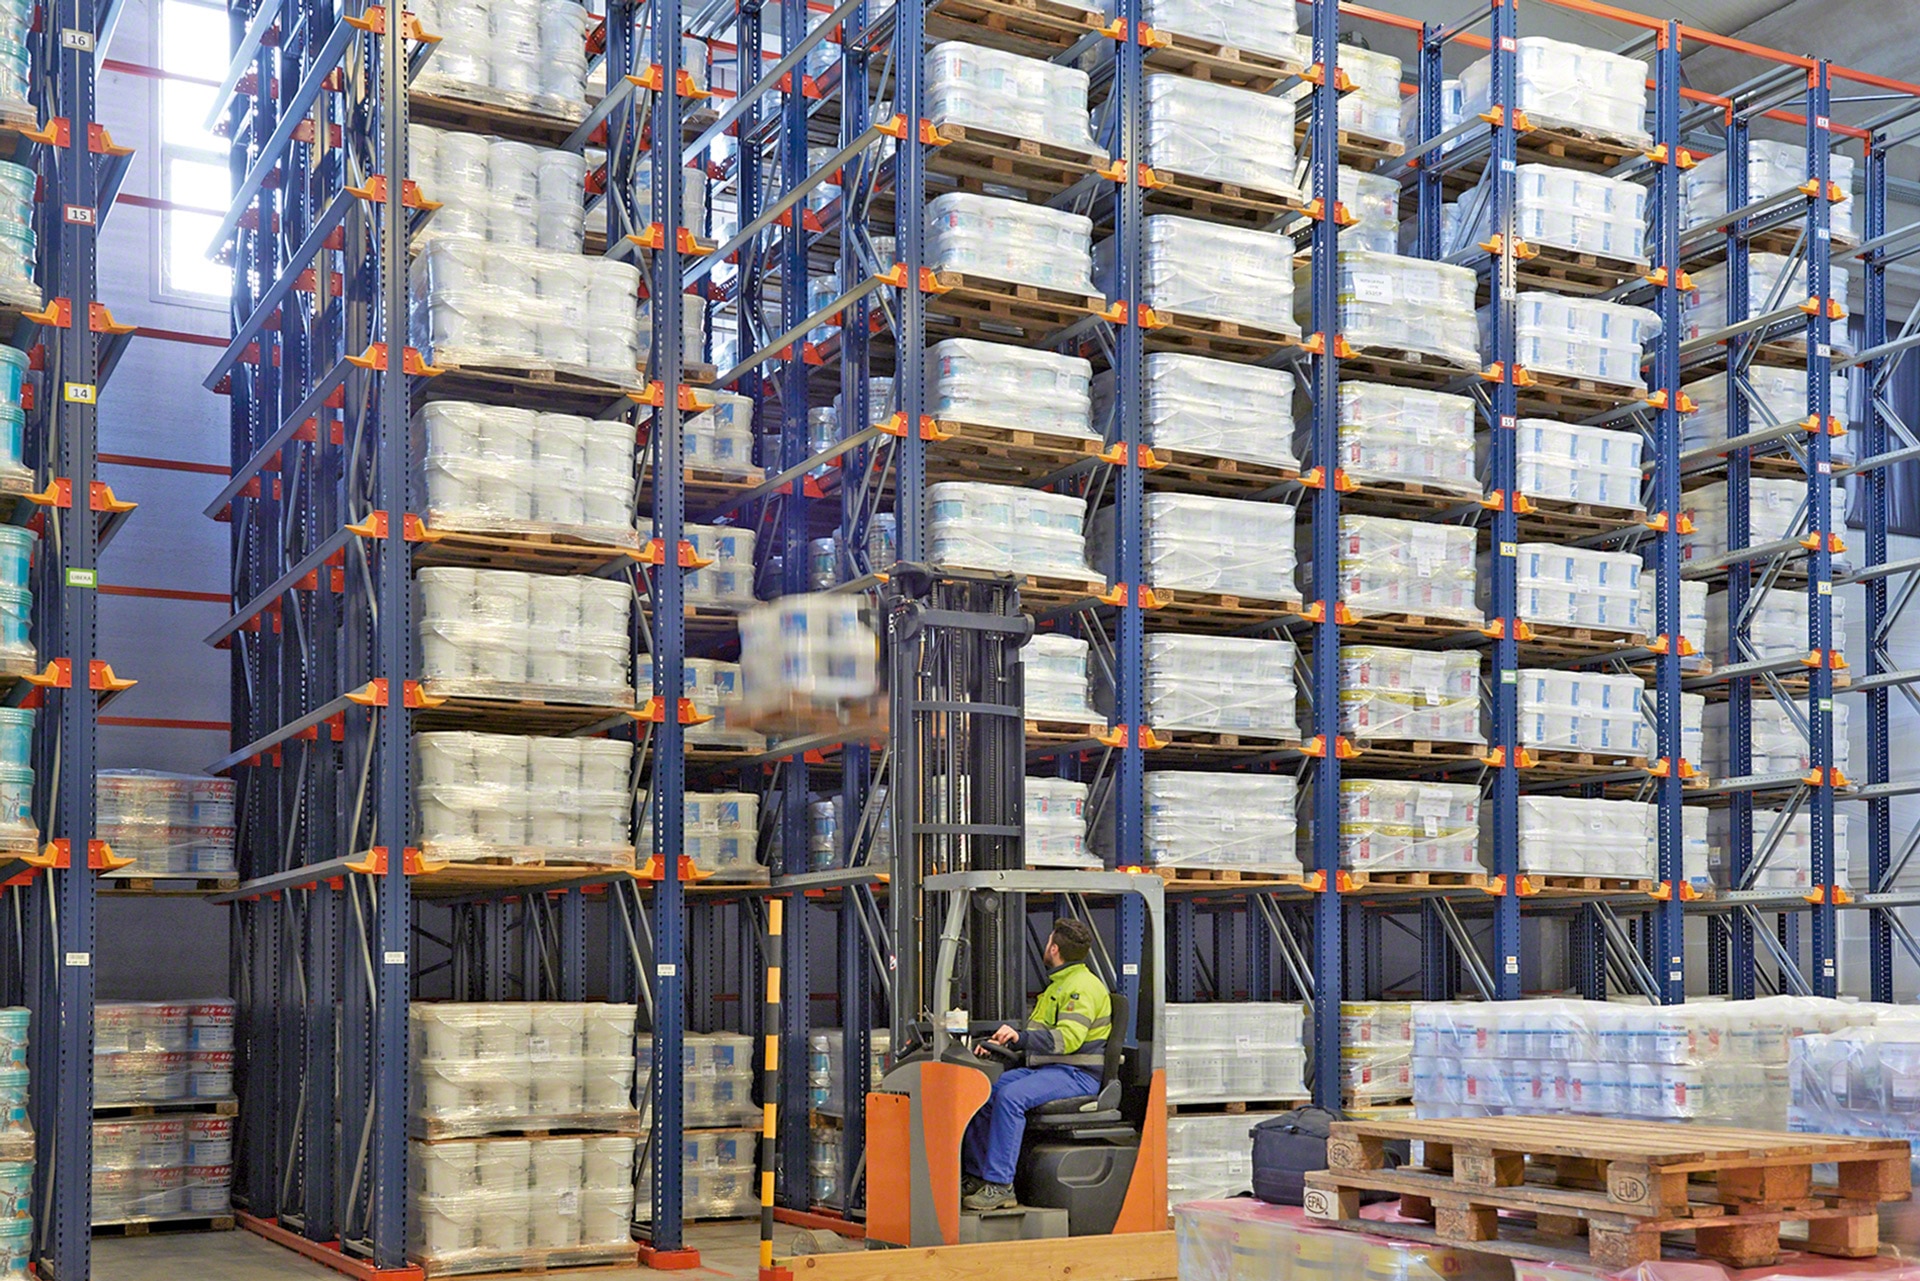 The drive-in racking is the ideal storage system to maximize capacity of the installation